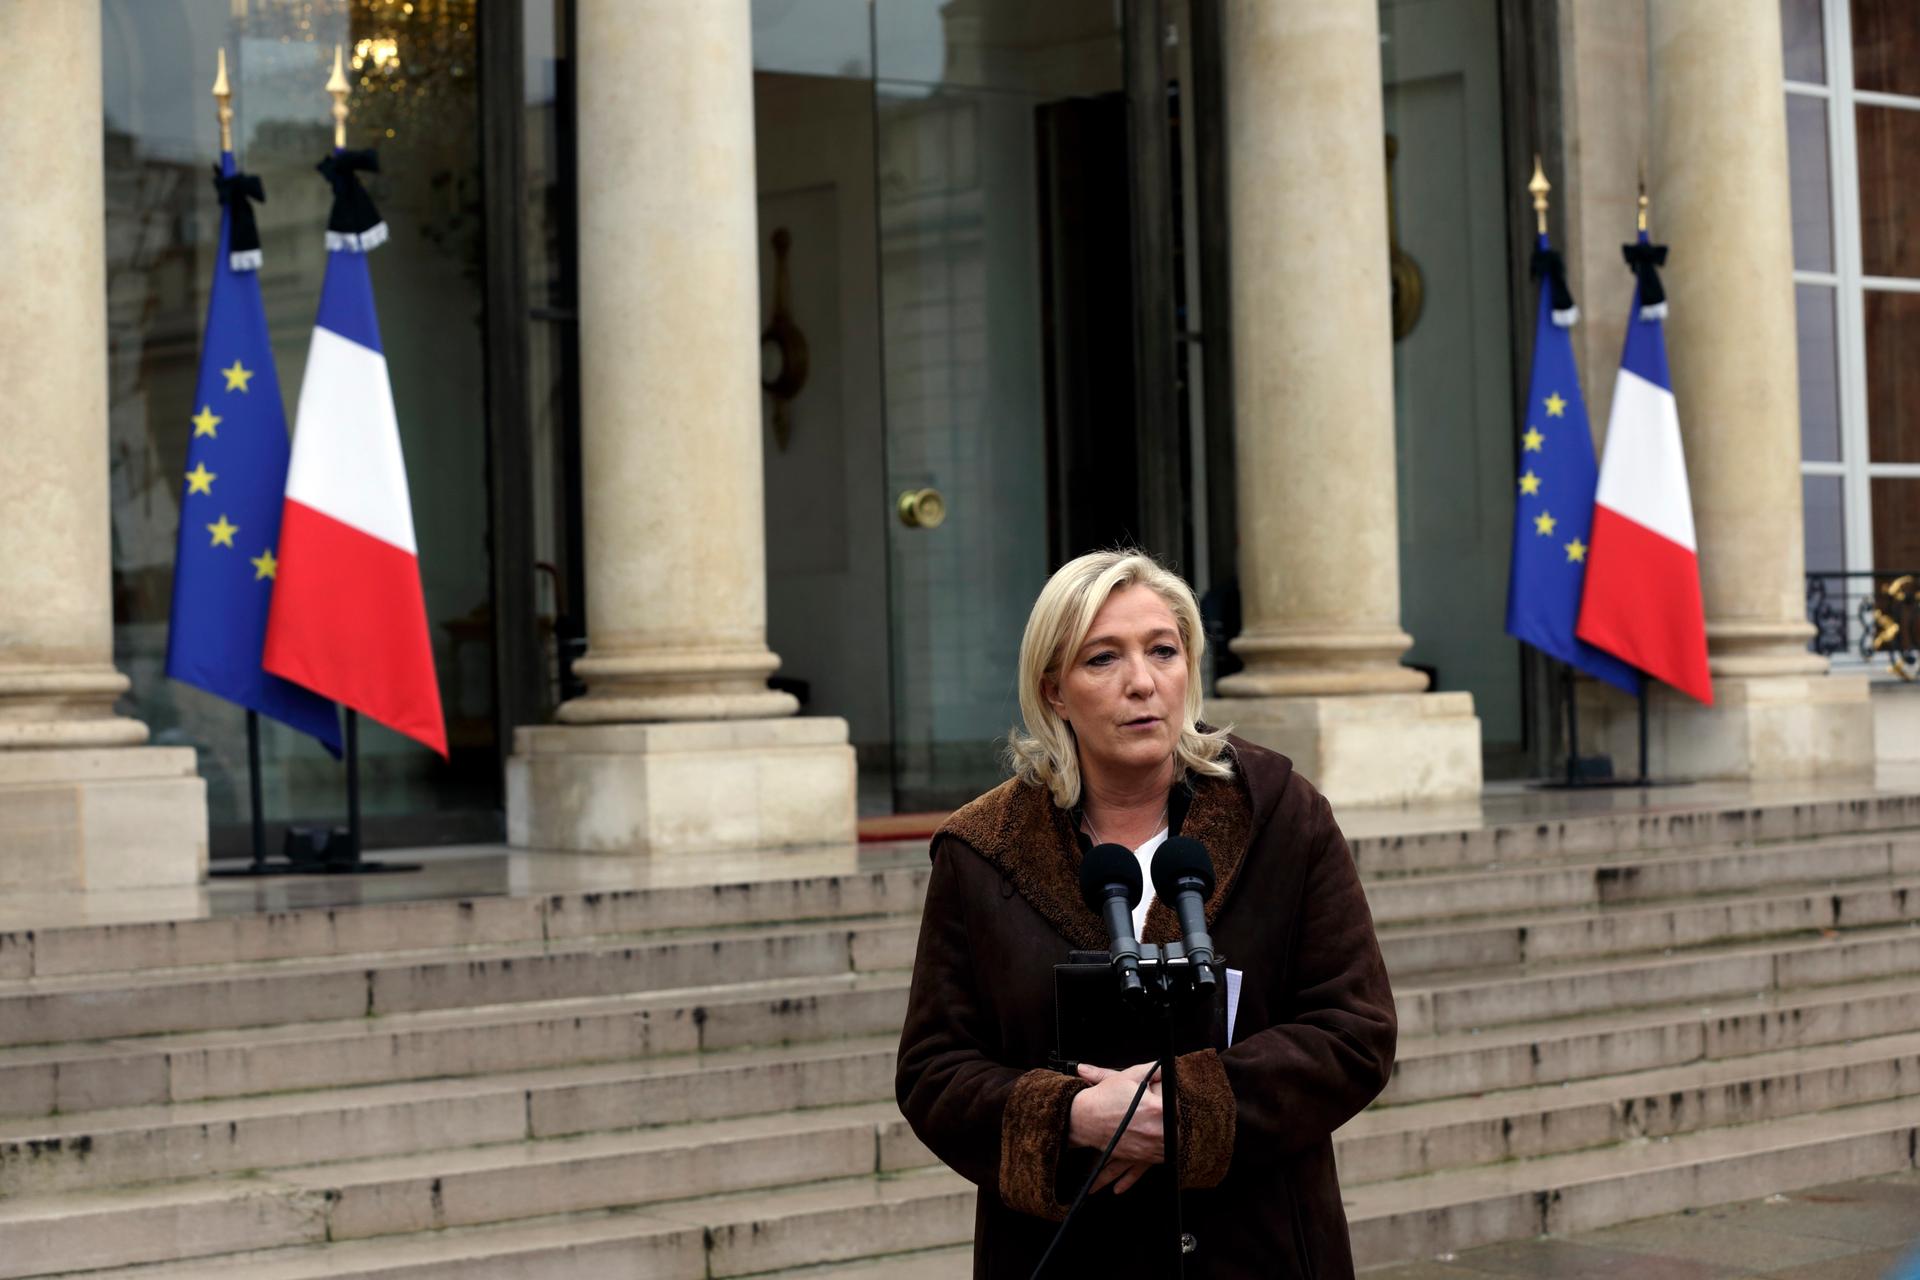 France's far-right National Front political party leader Marine Le Pen speaks to journalists as she leaves after a meeting at the Elyseé palace in Paris on January 9, 2015.